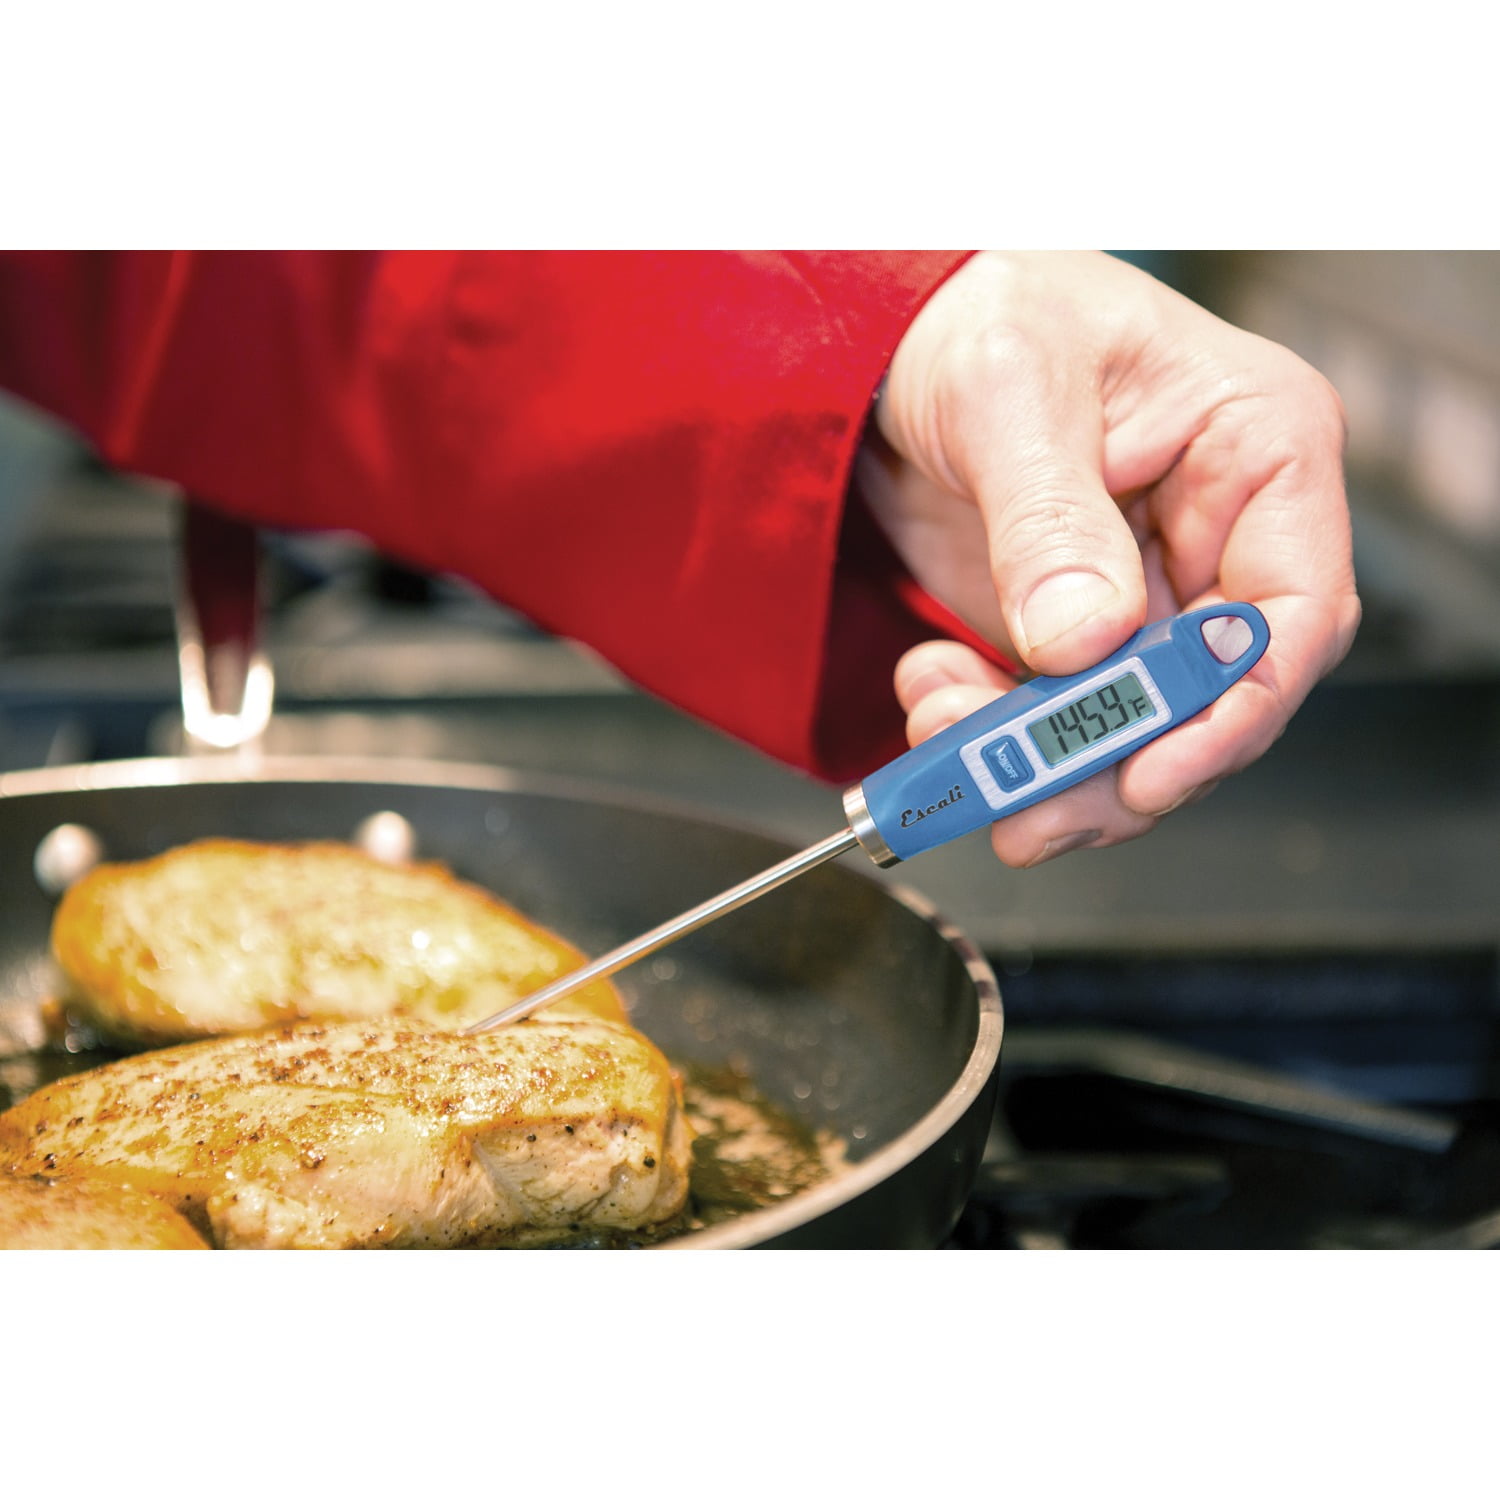 Escali Meat Thermometer - The Peppermill